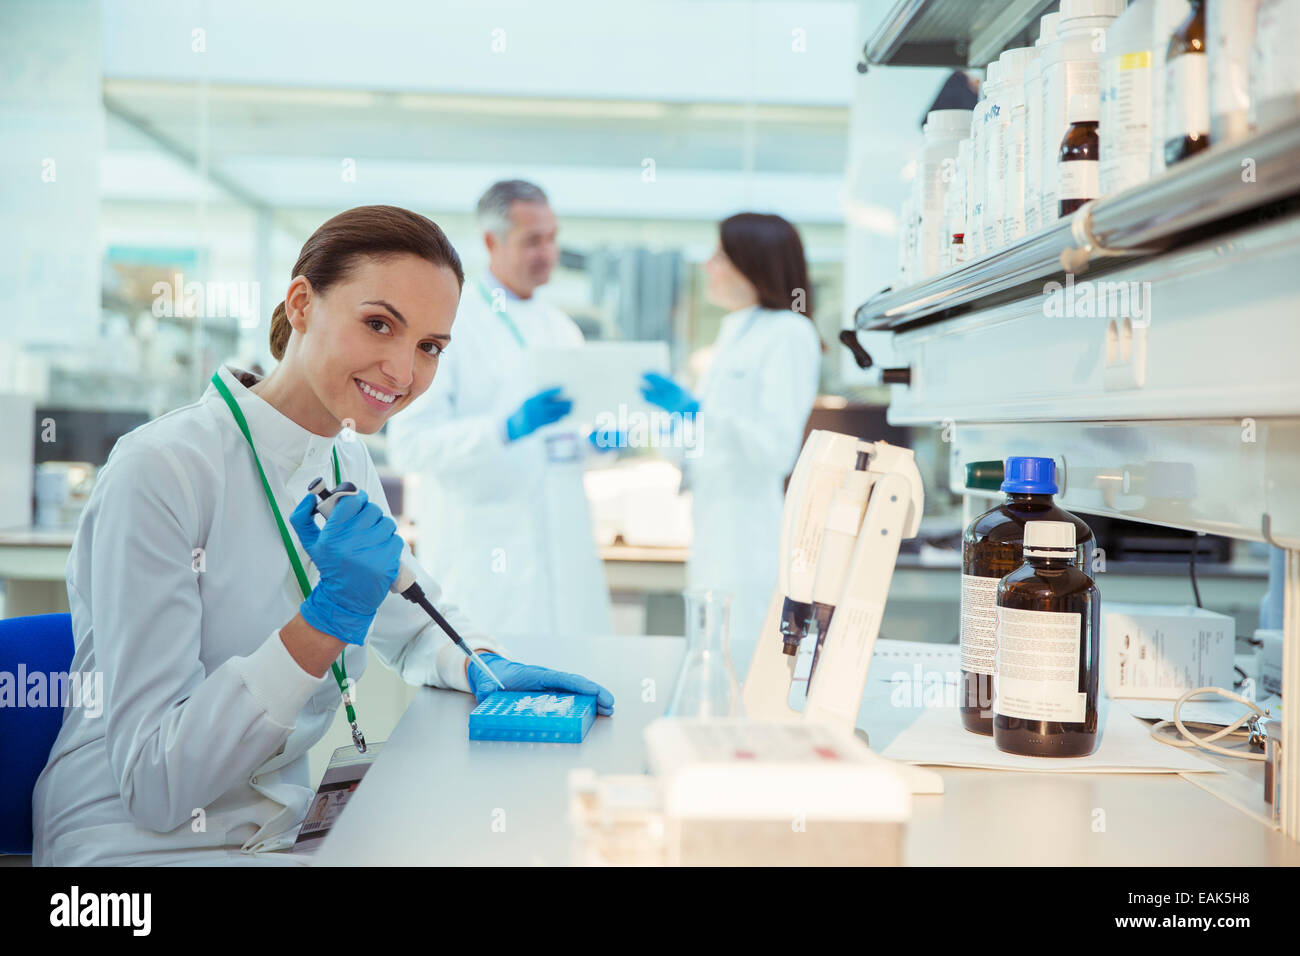 Scientist pipetting samples into tray in laboratory Stock Photo